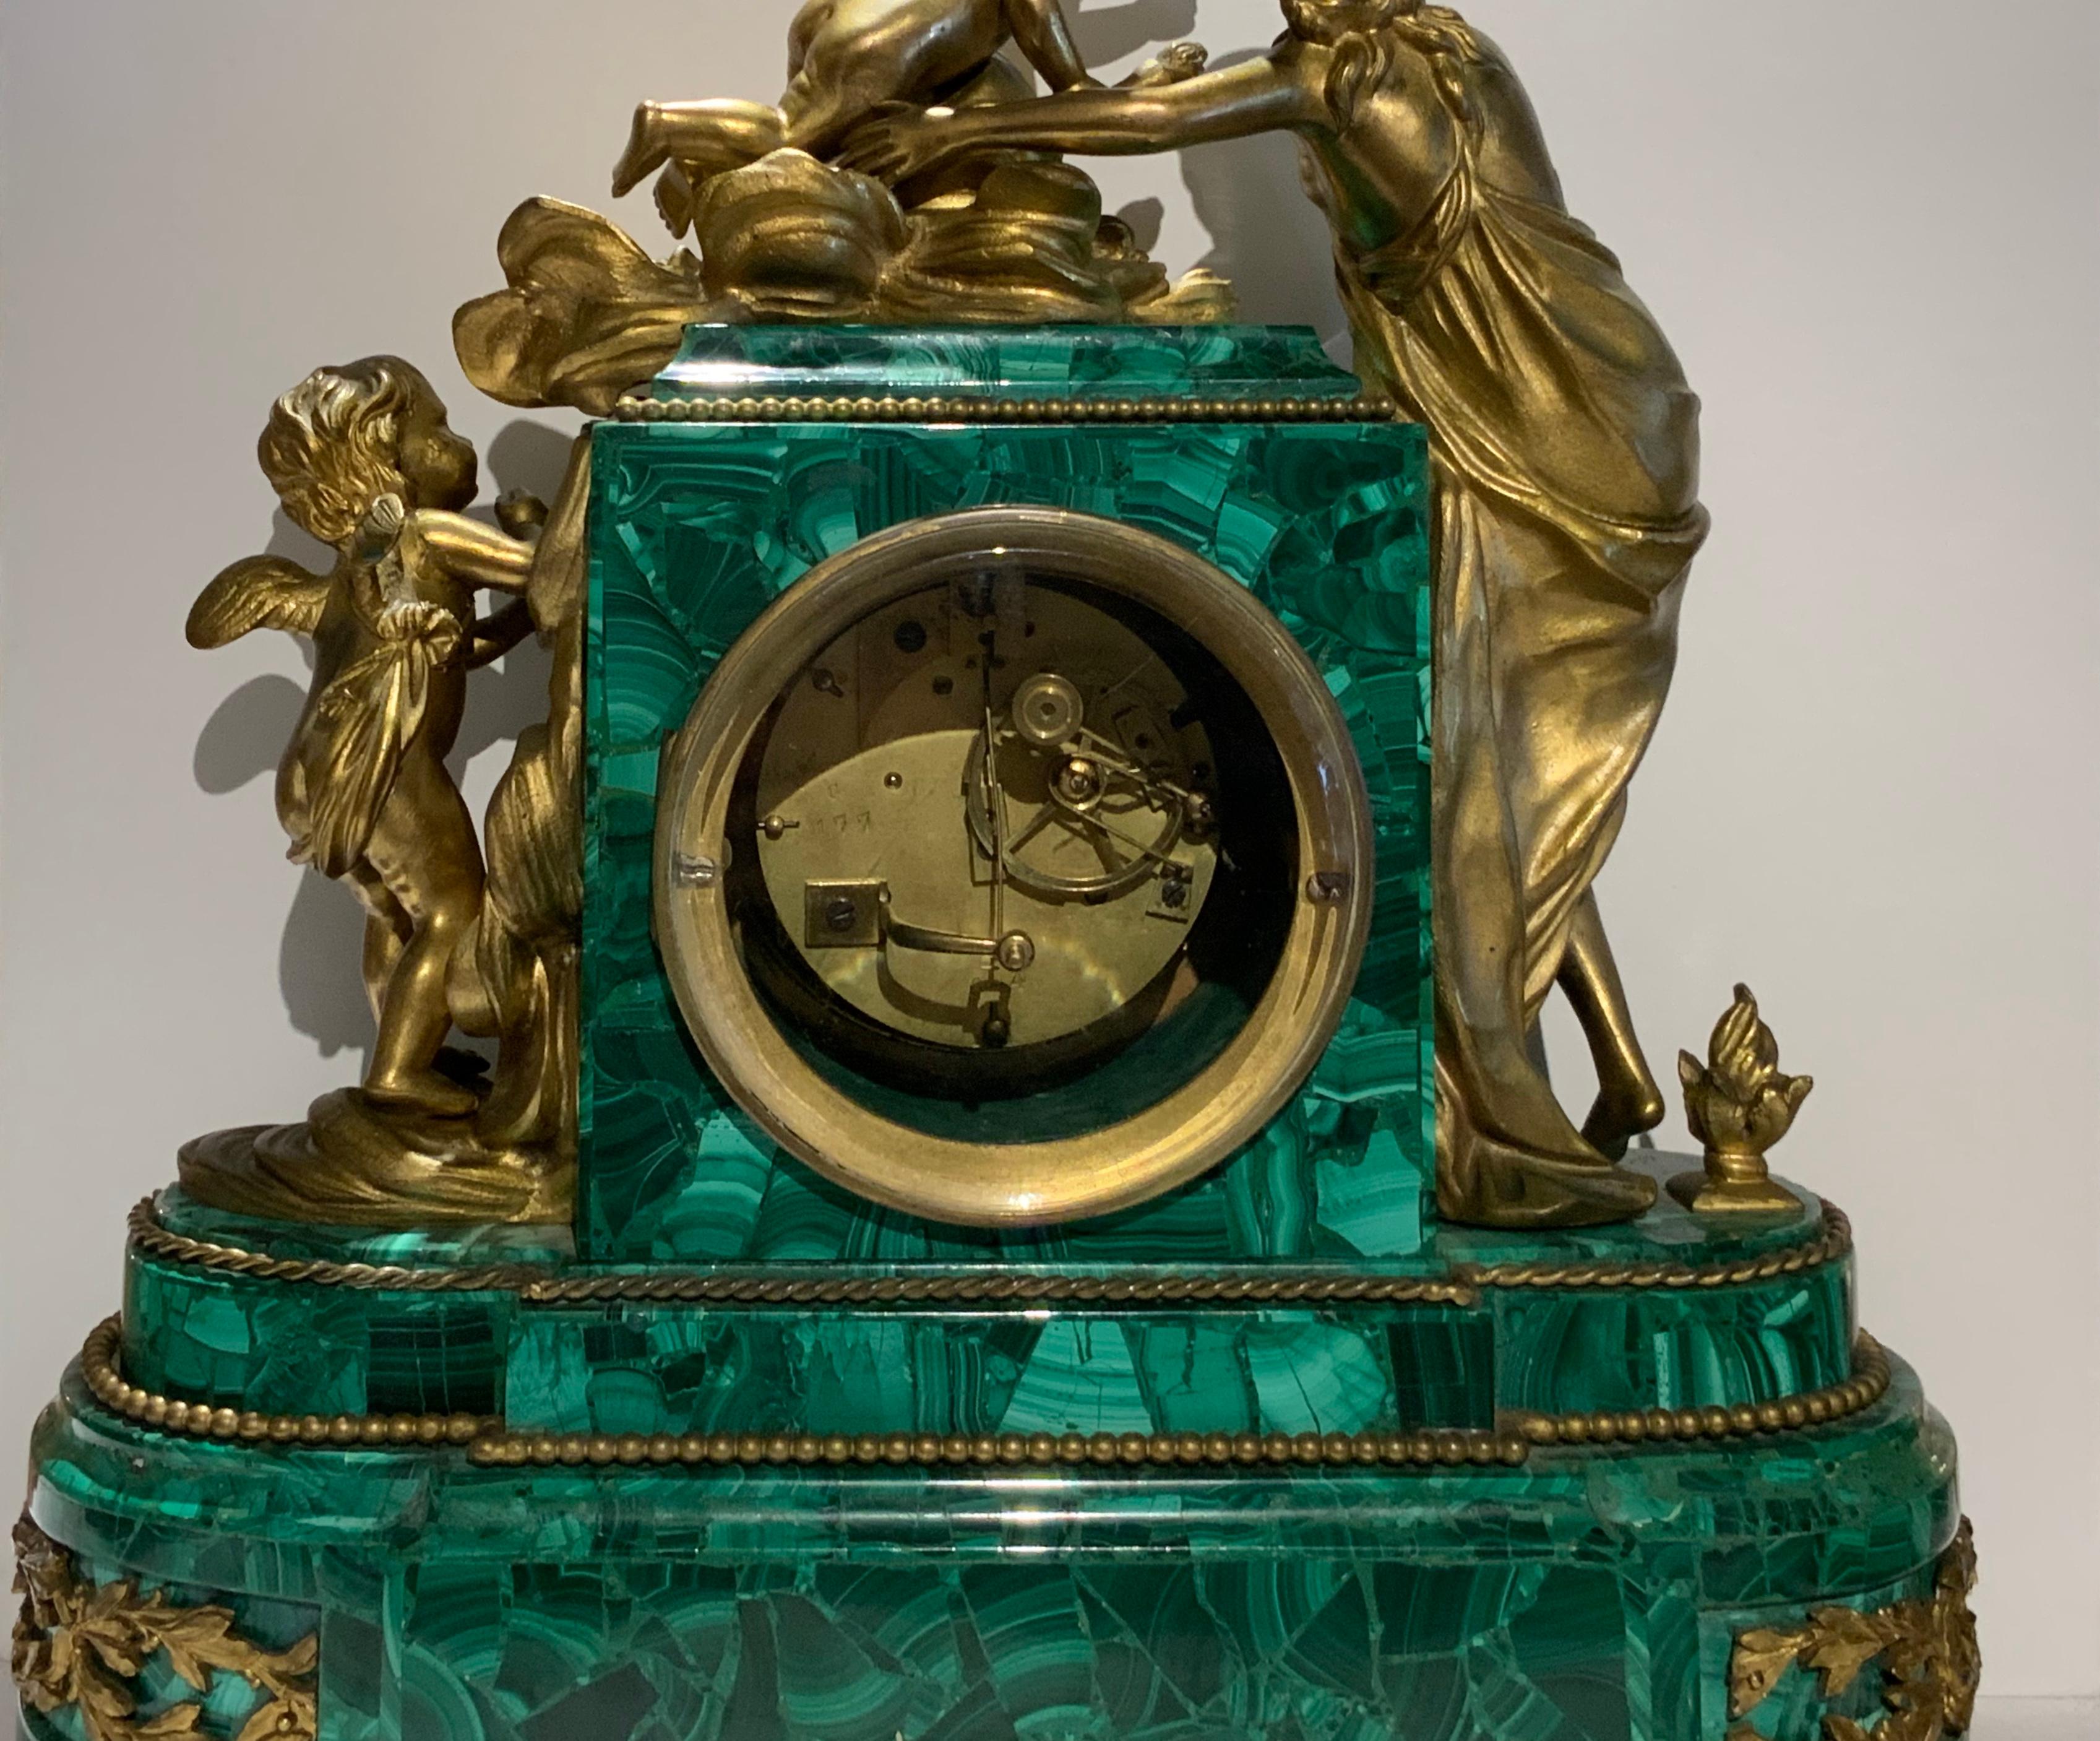 This mantel clock depicts a mythological group scene in bronze of figures representing a cupid with a torch in his right hand in clouds made of scrolls and foliage flirting with a semi nude Venus while another cupid is observing them. The clock case